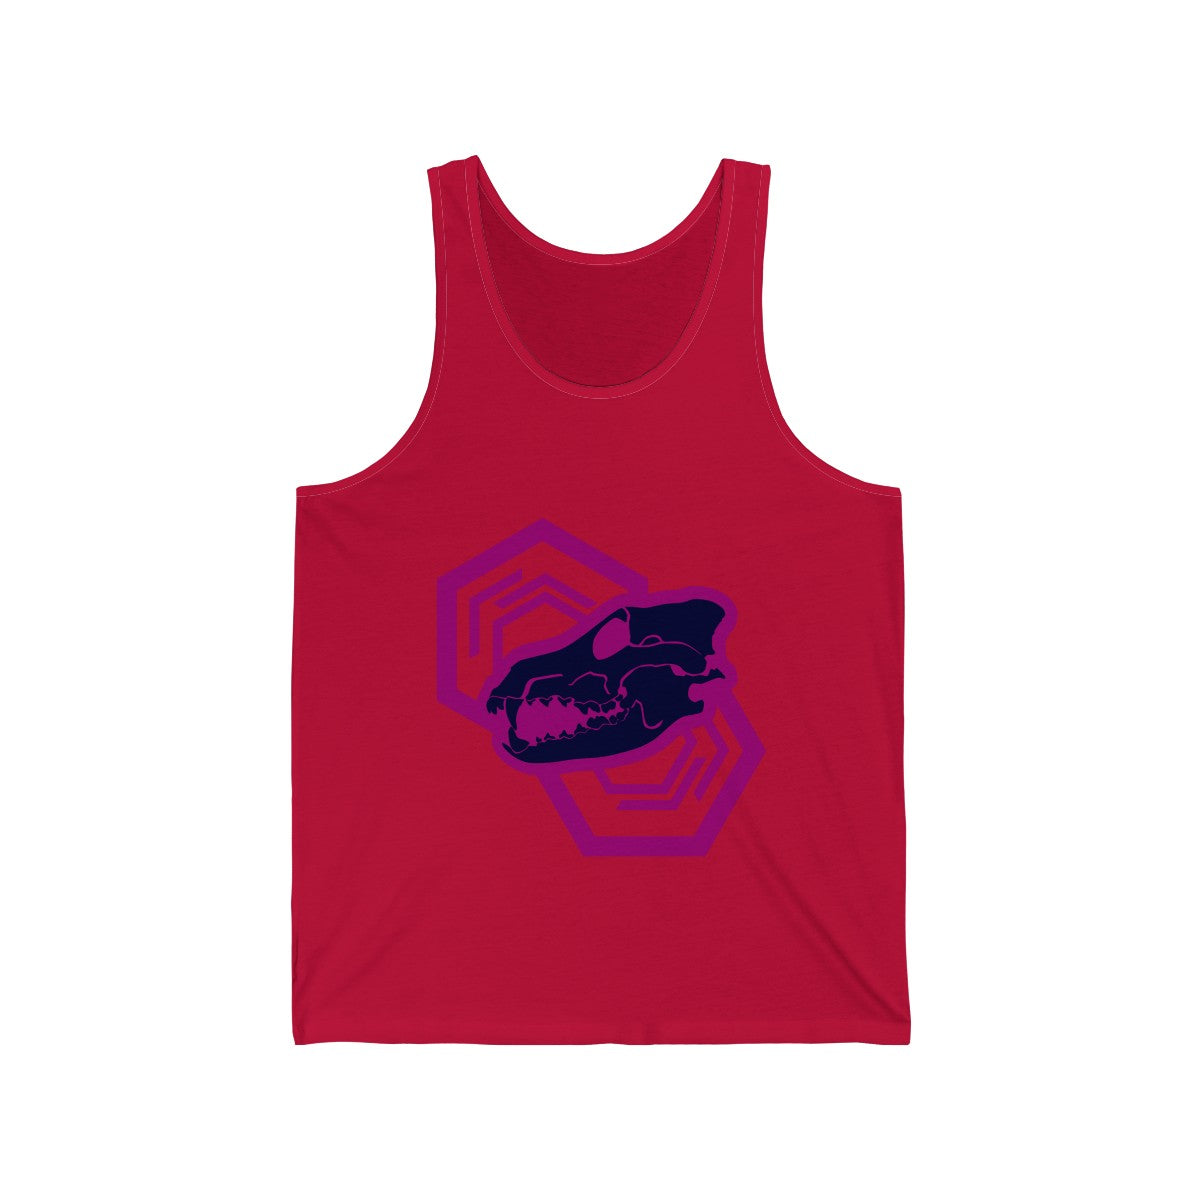 Skull Canine - Tank Top Tank Top Wexon Red XS 